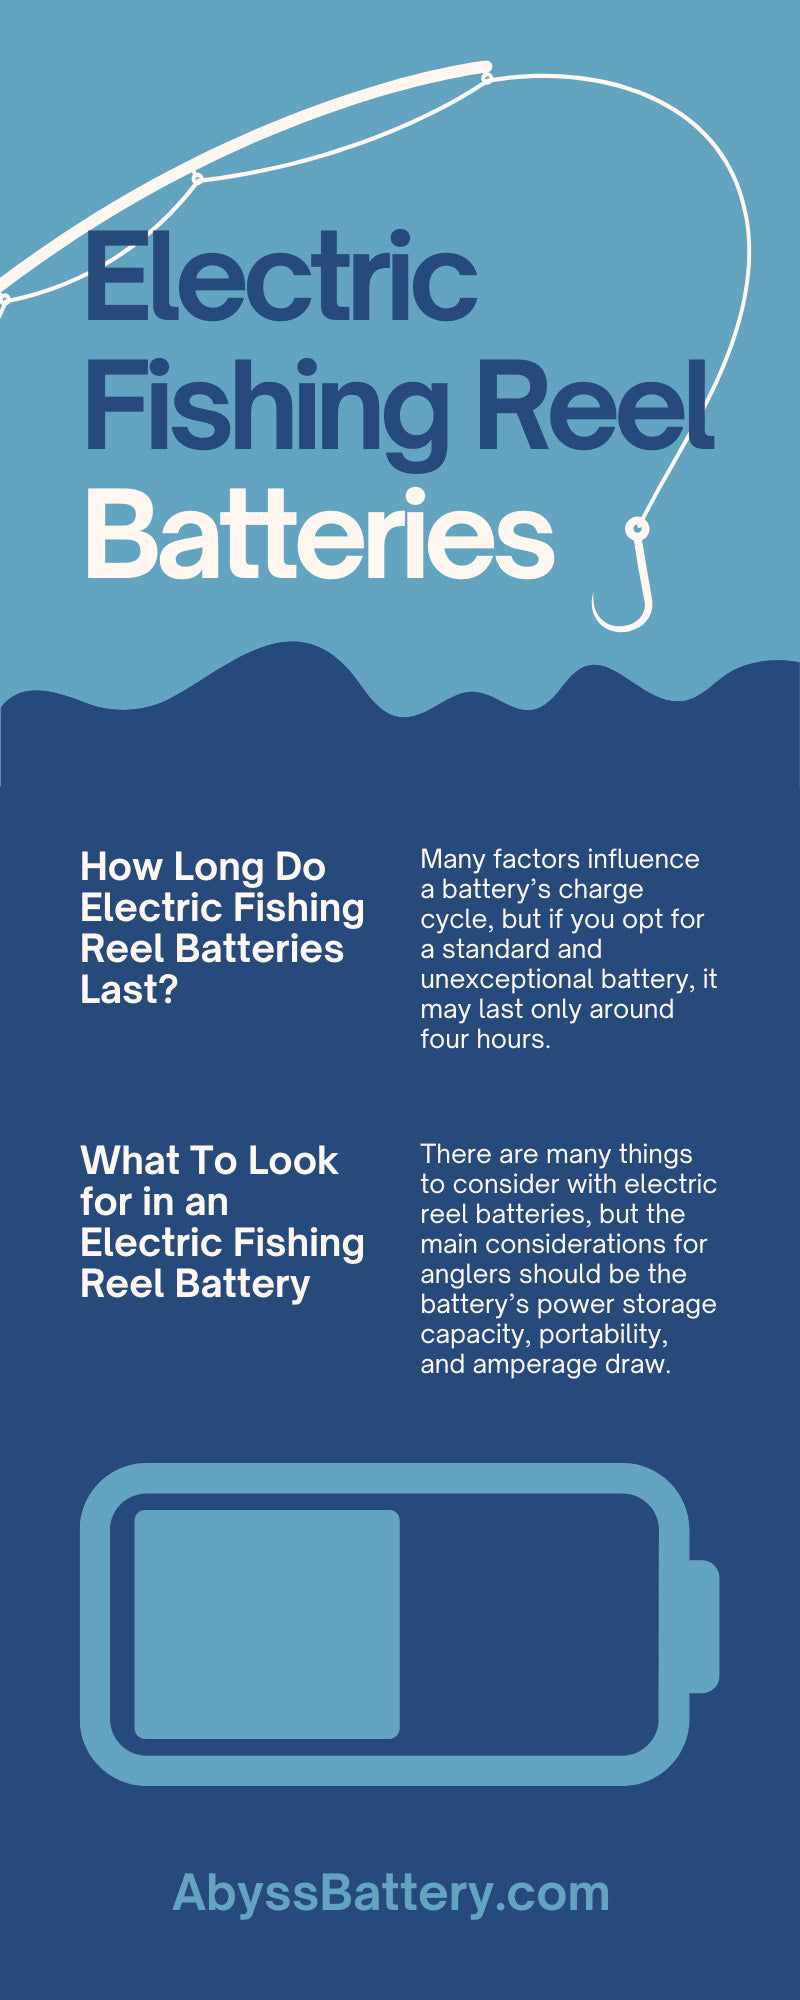 A Guide to Purchasing Electric Fishing Reel Batteries